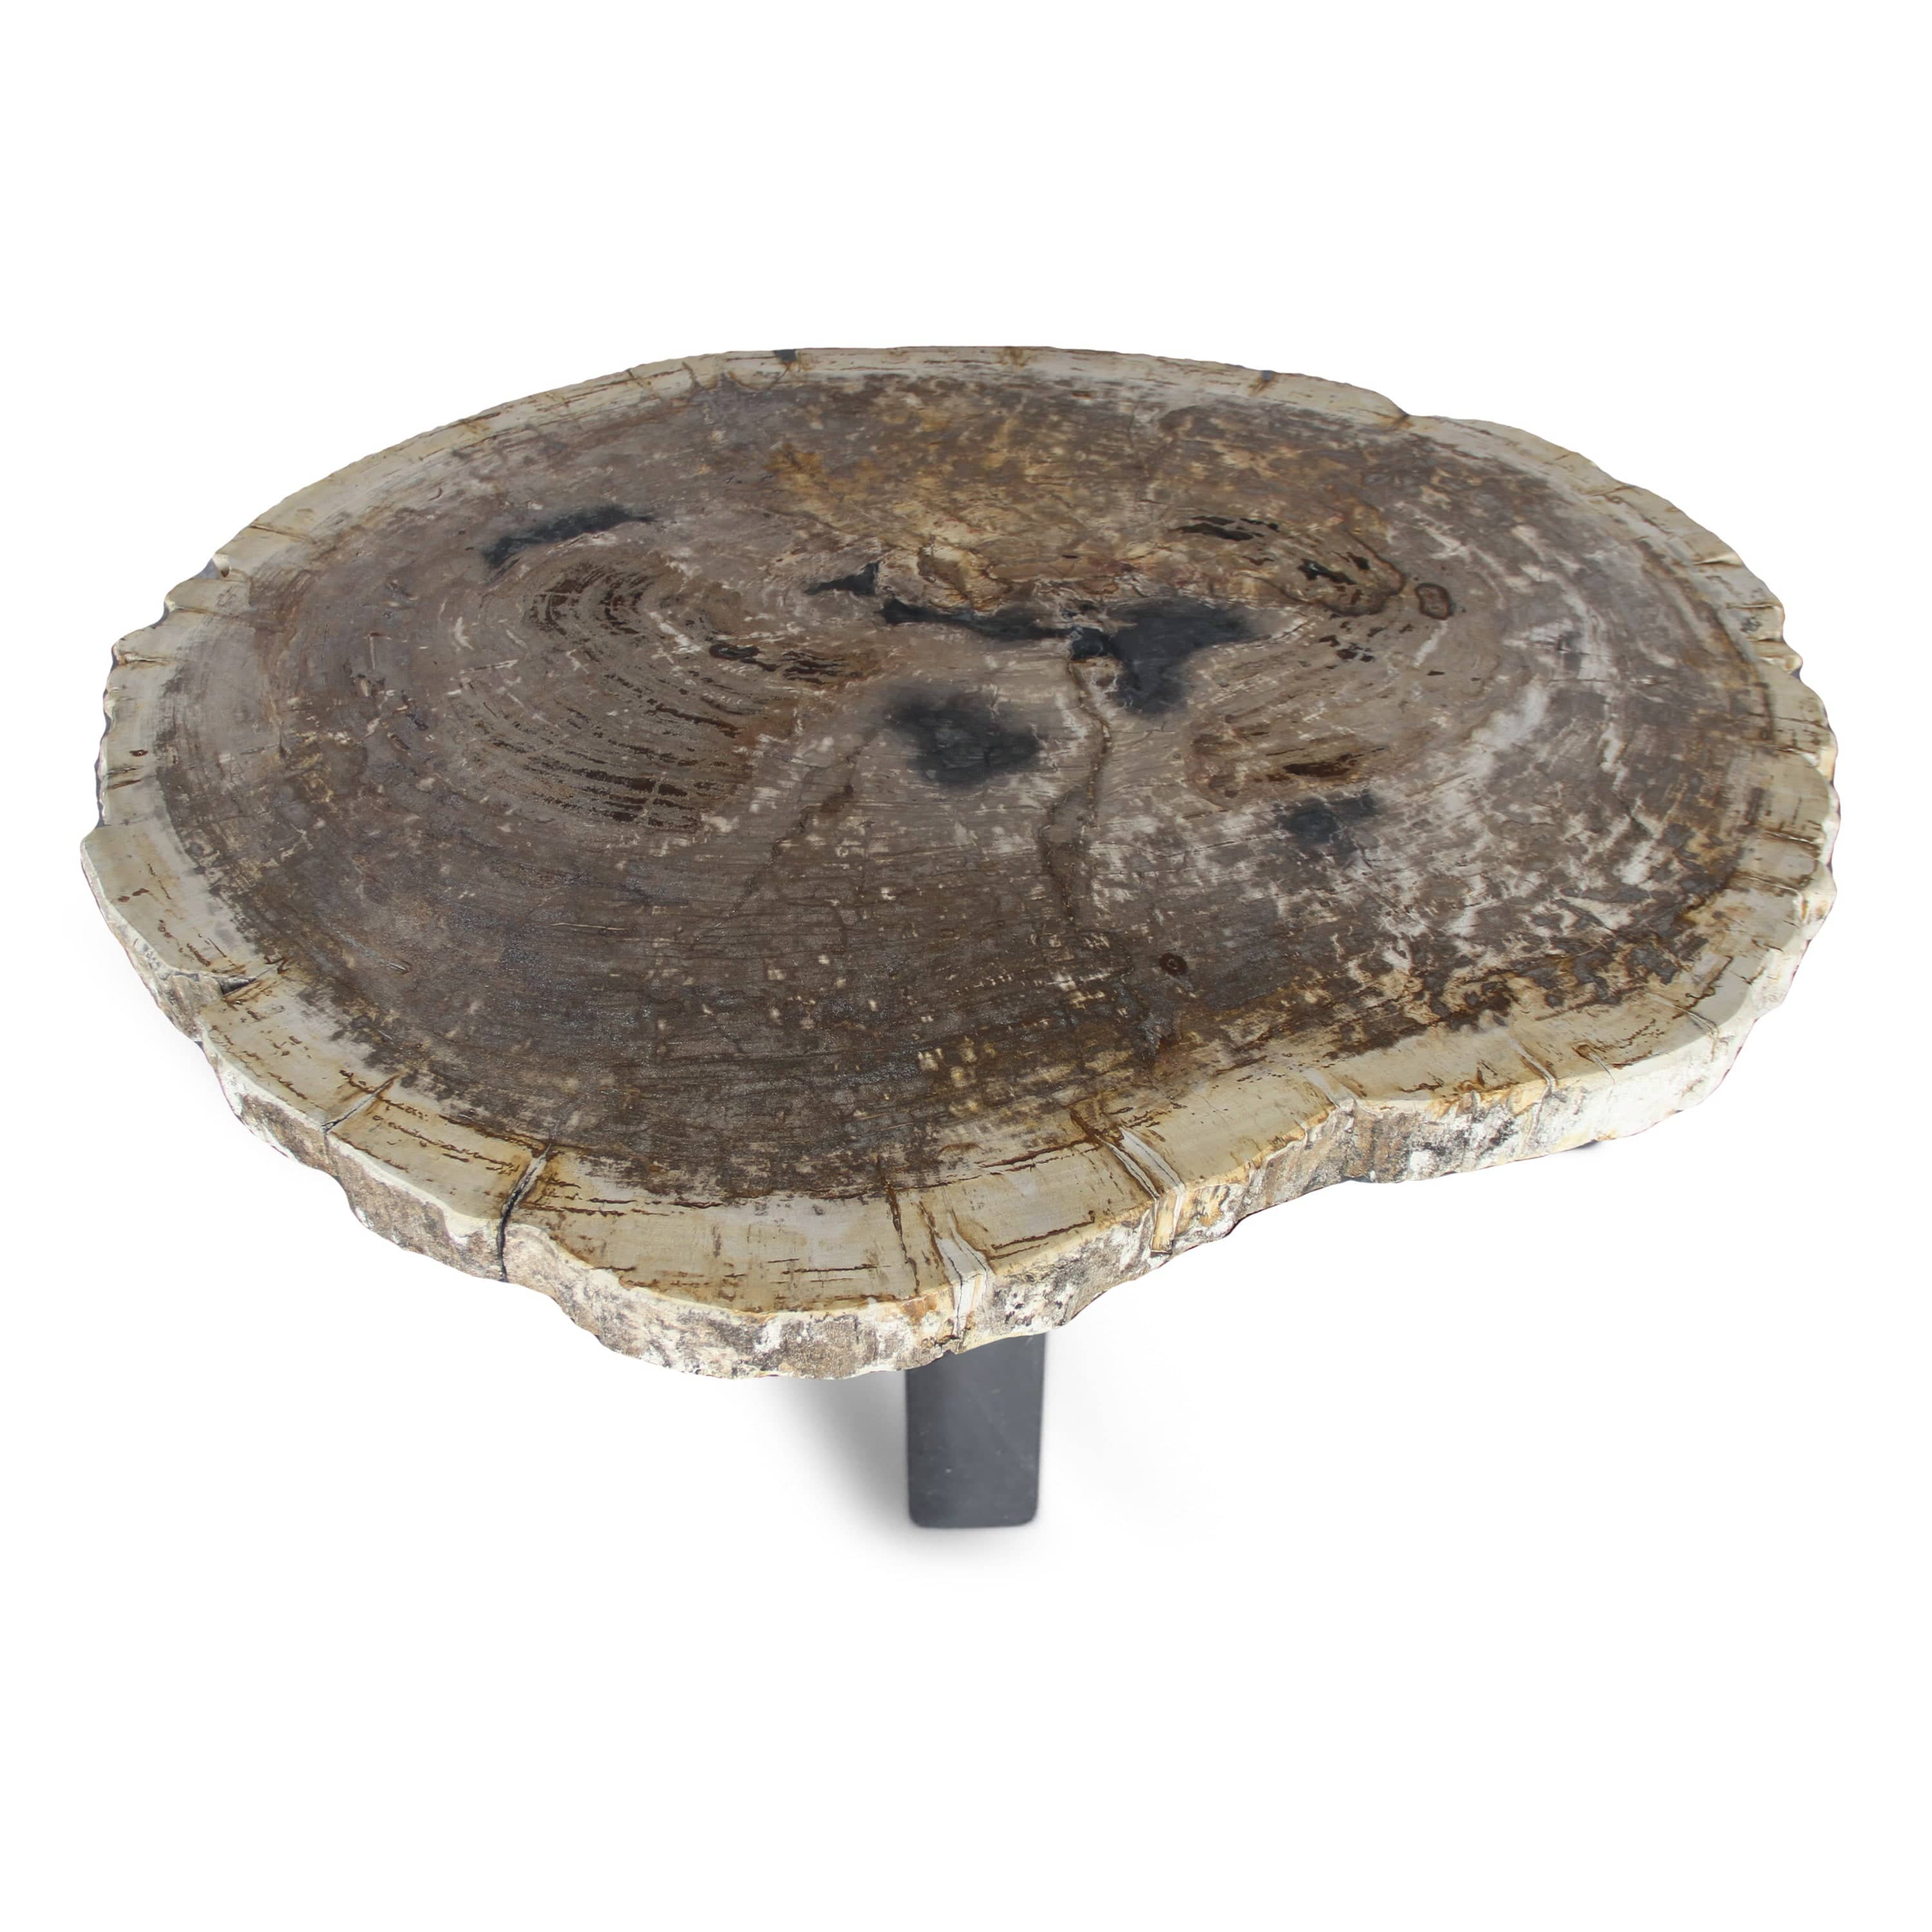 Kalifano Petrified Wood Petrified Wood Round Slab Coffee Table from Indonesia - 36" / 141 lbs PWT5200.002